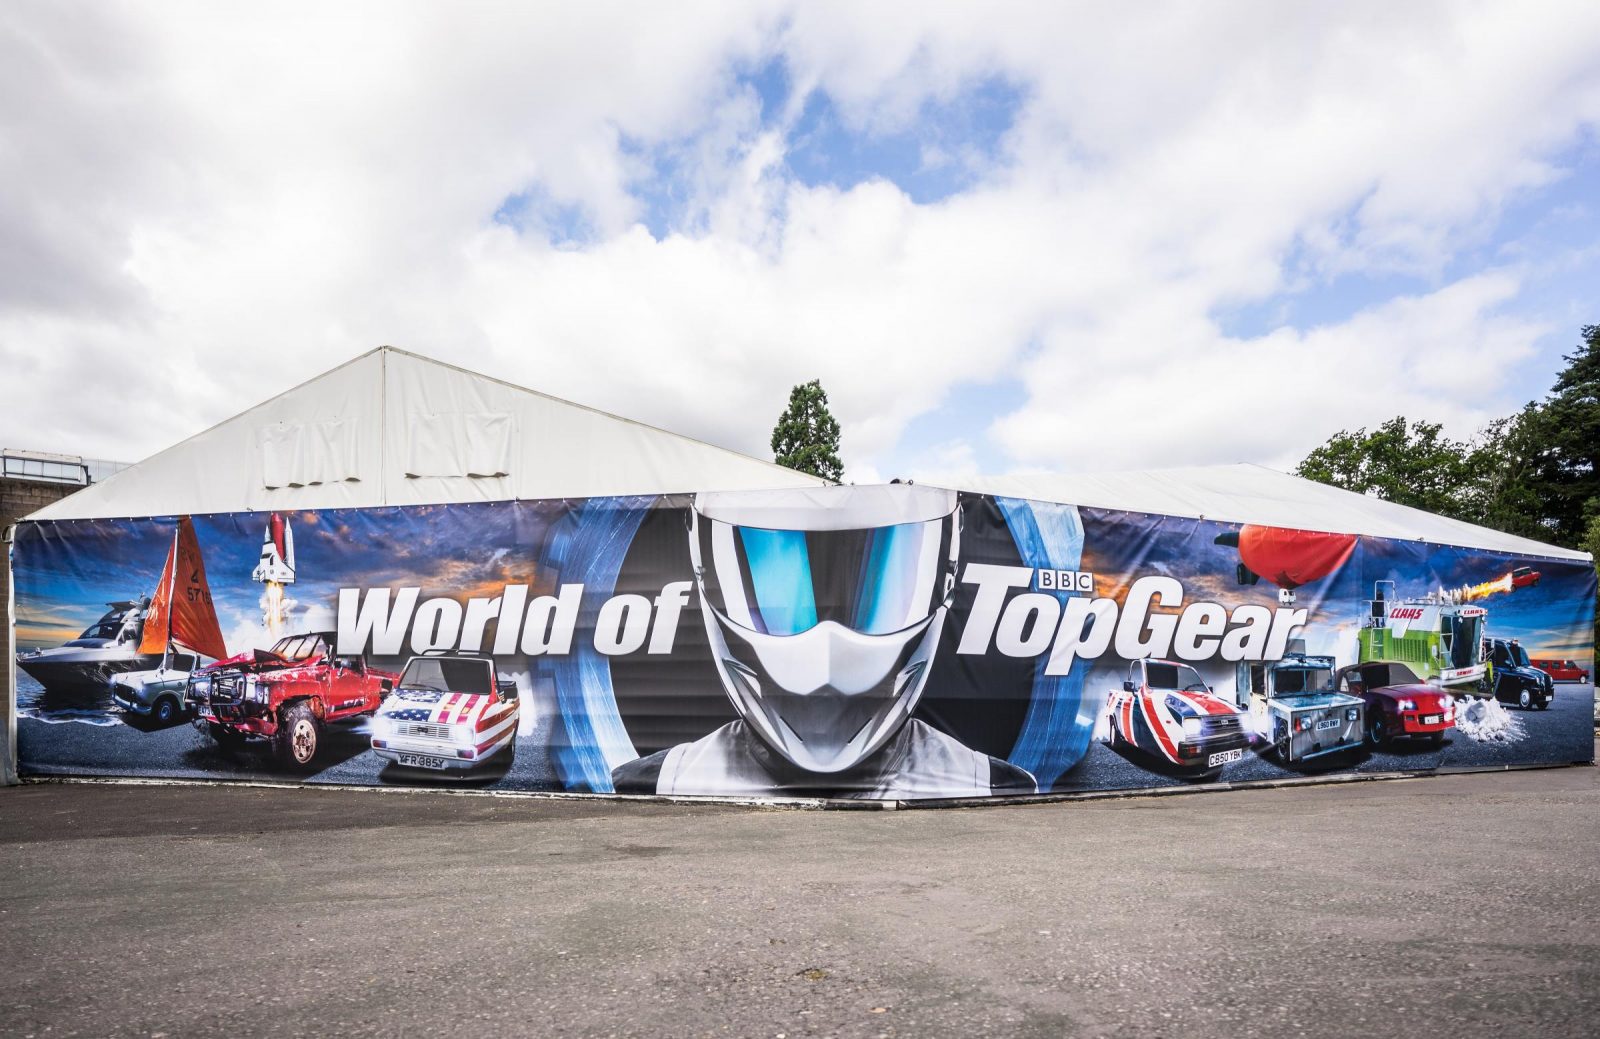 New-look World of Top launched at Beaulieu UK